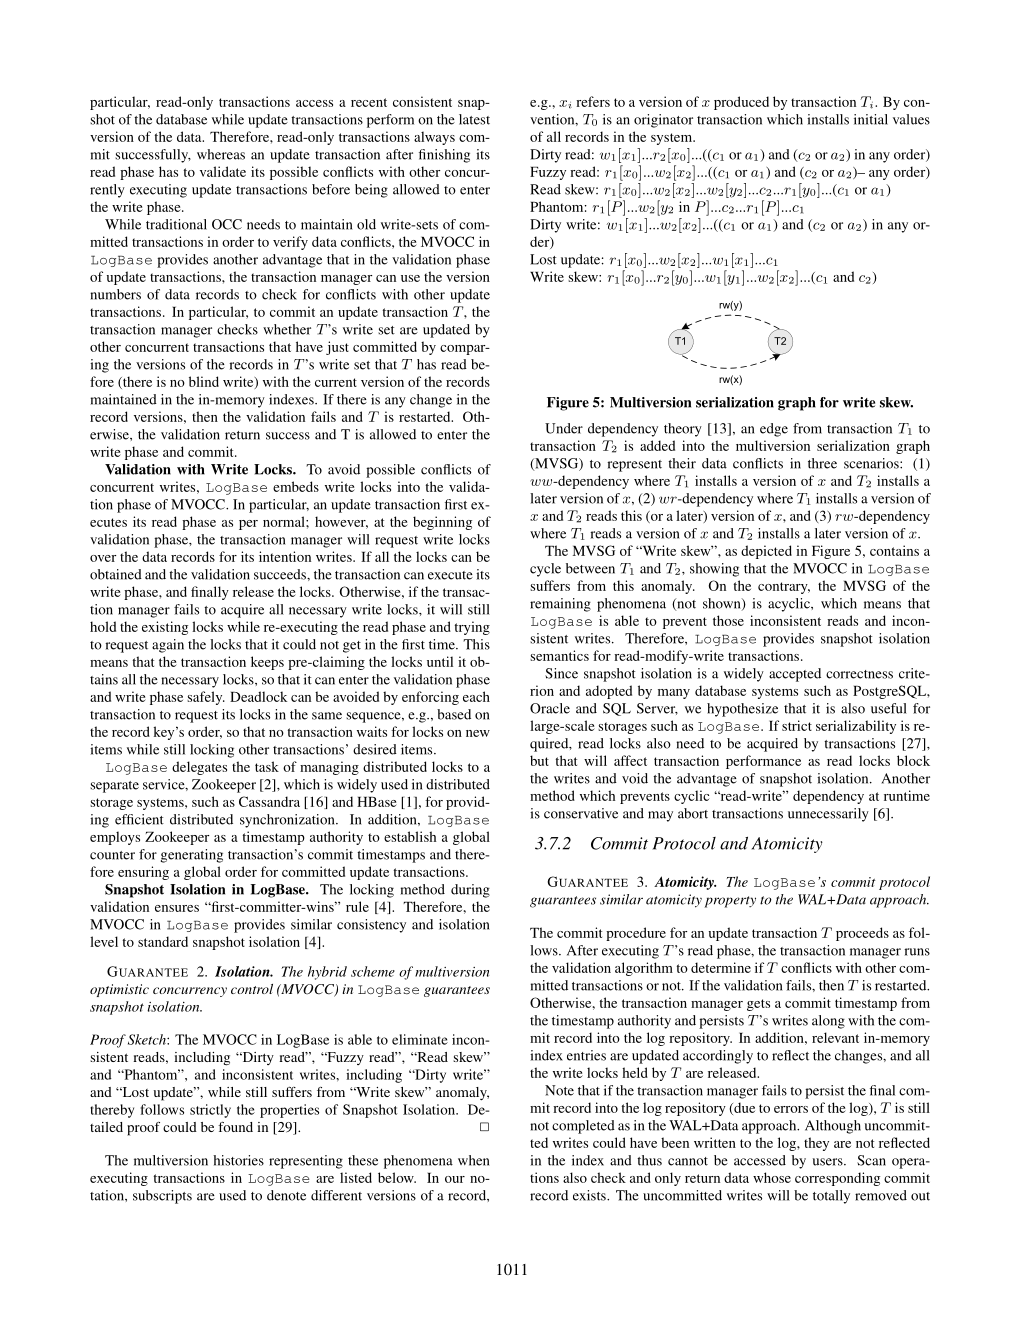 page 8